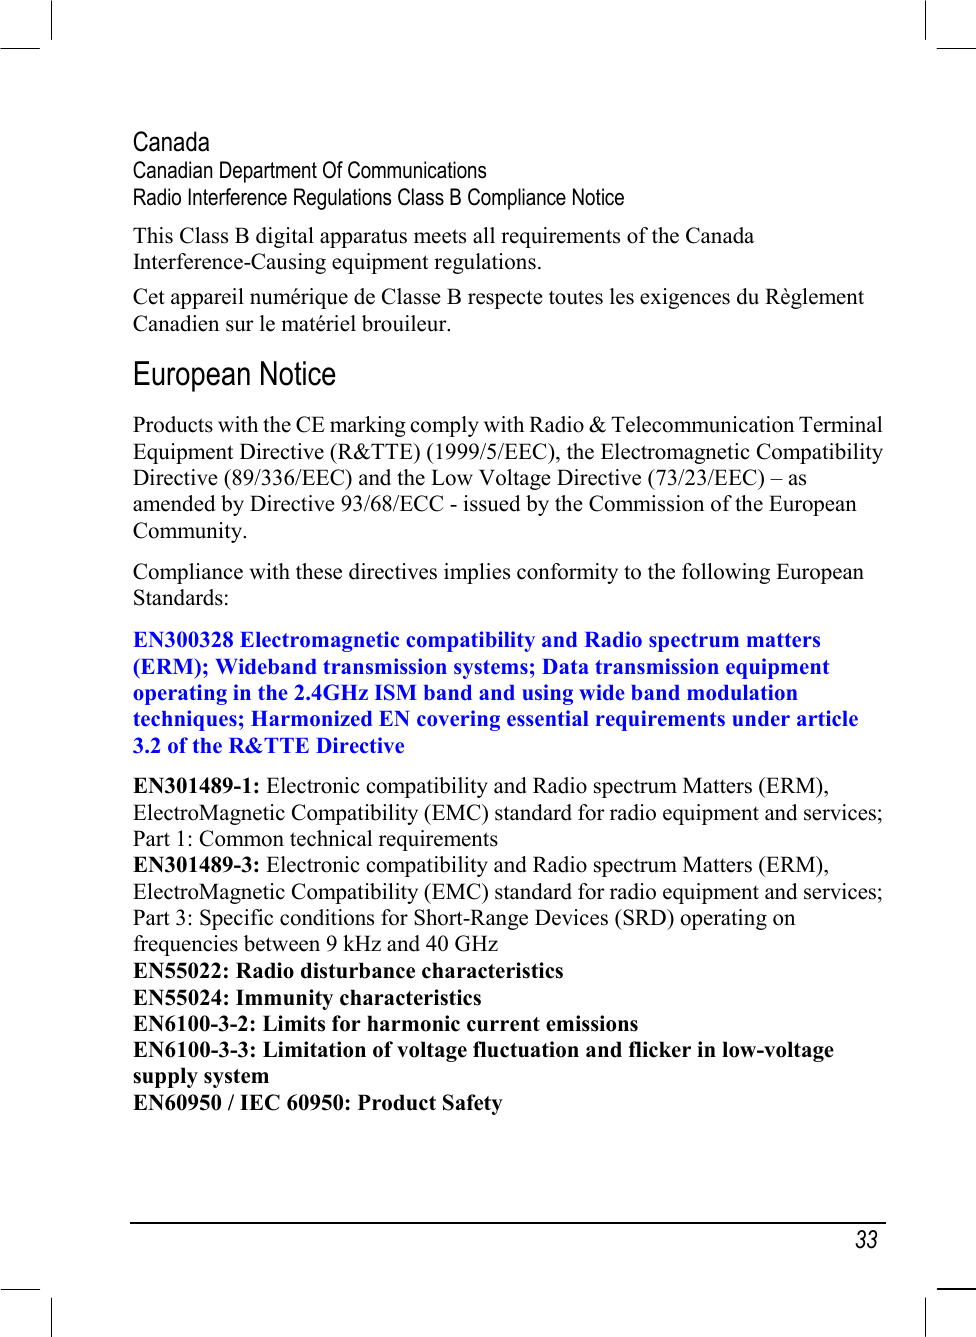   33 Canada Canadian Department Of Communications Radio Interference Regulations Class B Compliance Notice This Class B digital apparatus meets all requirements of the Canada Interference-Causing equipment regulations. Cet appareil numérique de Classe B respecte toutes les exigences du Règlement Canadien sur le matériel brouileur. European Notice Products with the CE marking comply with Radio &amp; Telecommunication Terminal Equipment Directive (R&amp;TTE) (1999/5/EEC), the Electromagnetic Compatibility Directive (89/336/EEC) and the Low Voltage Directive (73/23/EEC) – as amended by Directive 93/68/ECC - issued by the Commission of the European Community. Compliance with these directives implies conformity to the following European Standards: EN300328 Electromagnetic compatibility and Radio spectrum matters (ERM); Wideband transmission systems; Data transmission equipment operating in the 2.4GHz ISM band and using wide band modulation techniques; Harmonized EN covering essential requirements under article 3.2 of the R&amp;TTE Directive EN301489-1: Electronic compatibility and Radio spectrum Matters (ERM), ElectroMagnetic Compatibility (EMC) standard for radio equipment and services; Part 1: Common technical requirements EN301489-3: Electronic compatibility and Radio spectrum Matters (ERM), ElectroMagnetic Compatibility (EMC) standard for radio equipment and services; Part 3: Specific conditions for Short-Range Devices (SRD) operating on frequencies between 9 kHz and 40 GHz EN55022: Radio disturbance characteristics EN55024: Immunity characteristics EN6100-3-2: Limits for harmonic current emissions EN6100-3-3: Limitation of voltage fluctuation and flicker in low-voltage supply system EN60950 / IEC 60950: Product Safety  